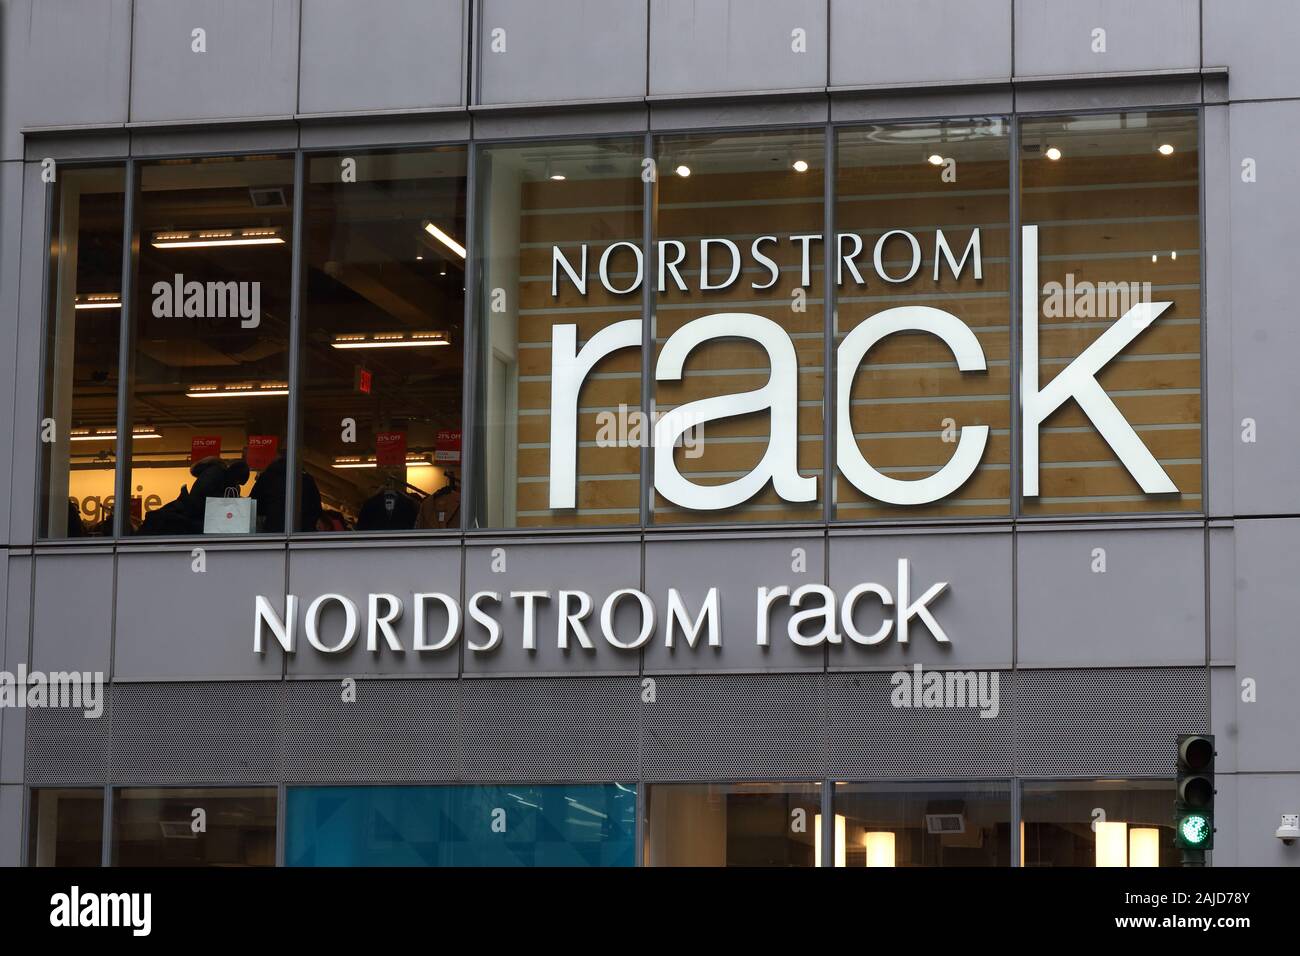 The Nordstrom Rack logo at their 865 6th Ave, New York, NY location Stock Photo